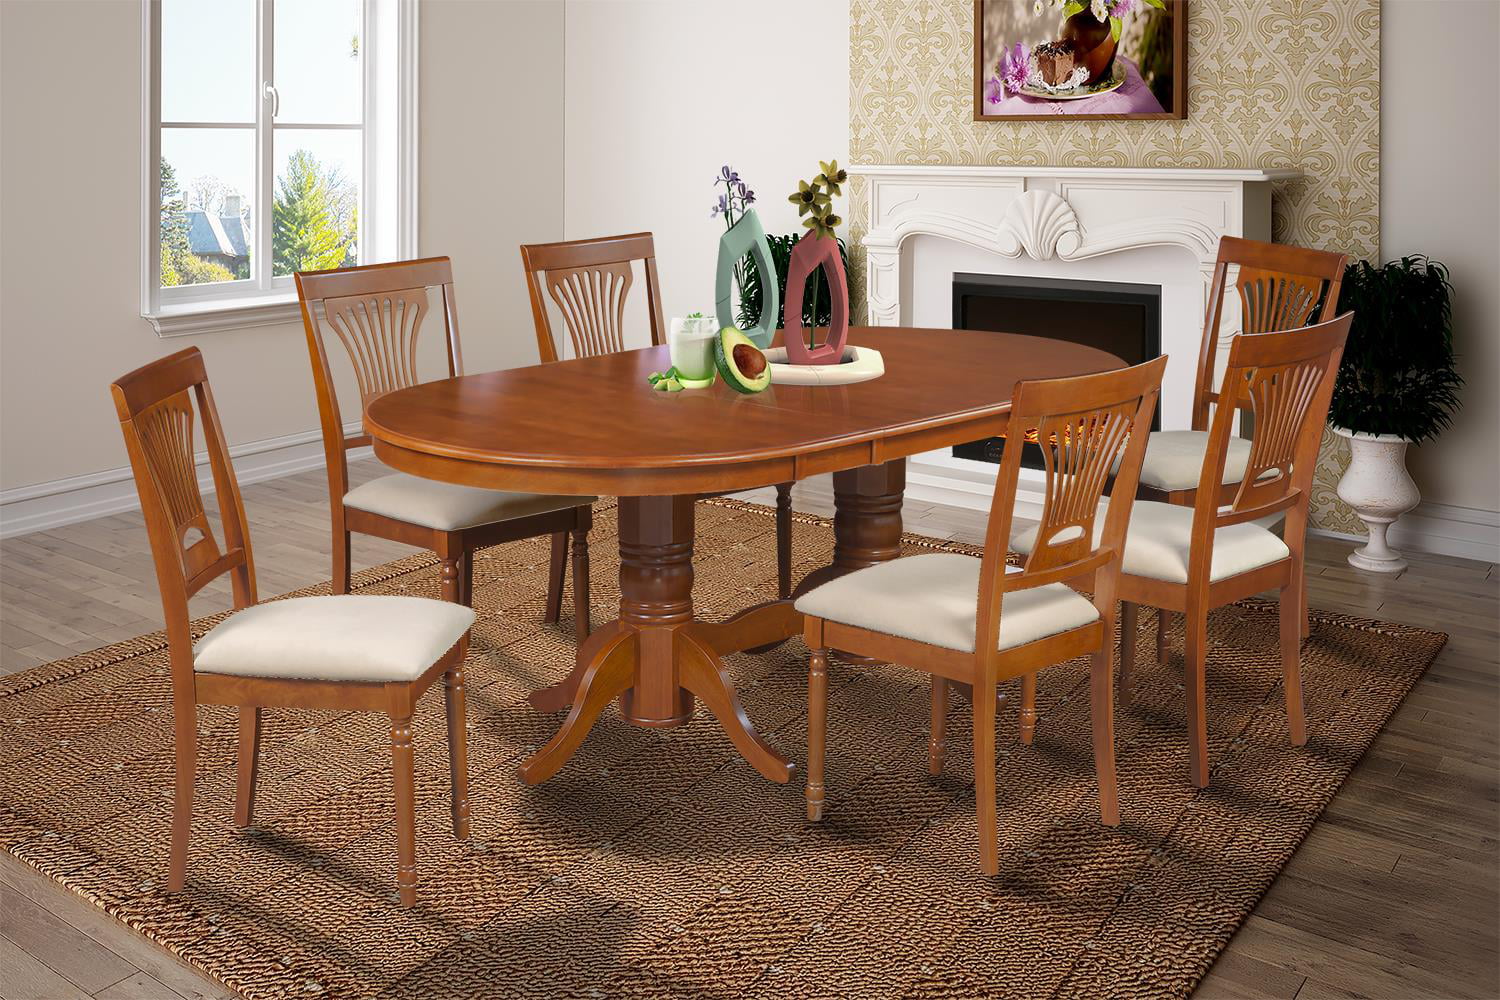 7 Piece Dining Room Set Table With A Butterfly Leaf And 6 Dining Chairs ...